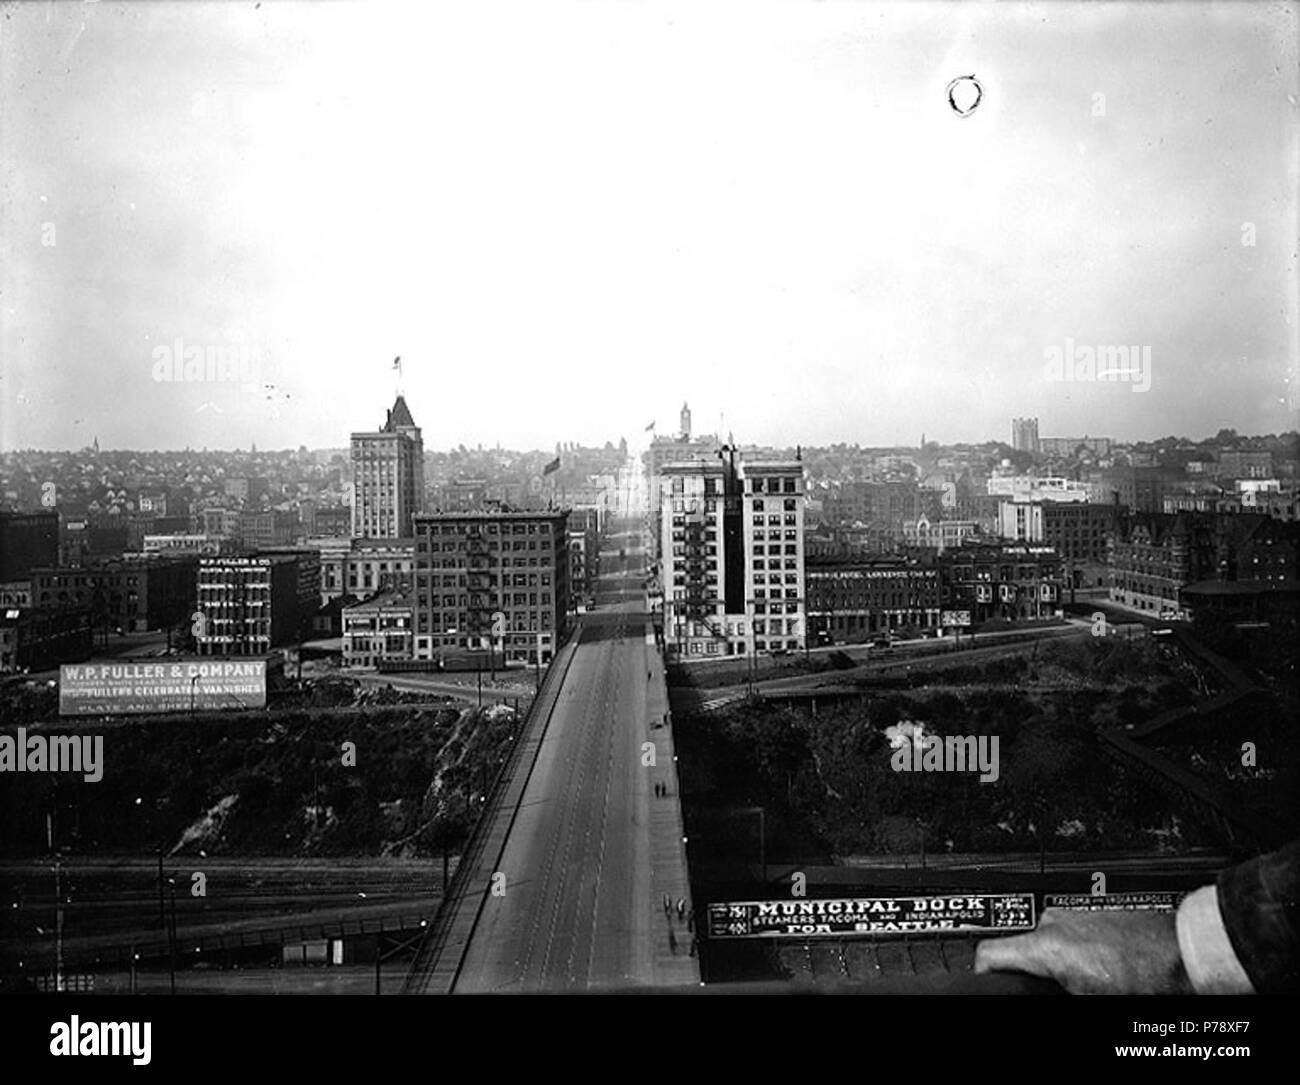 . English: Eleventh Street Bridge, Tacoma, Washington, ca. 1919. English: Looking west. On sleeve of negative: Tacoma. Looking up 11th St. from towers of the bridge. Subjects (LCTGM): Bridges--Washington (State)--Tacoma; Streets--Washington (State)--Tacoma Subjects (LCSH): Eleventh Street Bridge (Tacoma, Wash.); Eleventh Street (Tacoma, Wash.); Tacoma (Wash.)--Buildings, structures, etc.  . circa 1919 19 Eleventh Street Bridge, Tacoma, Washington, ca 1919 (BAR 106) Stock Photo